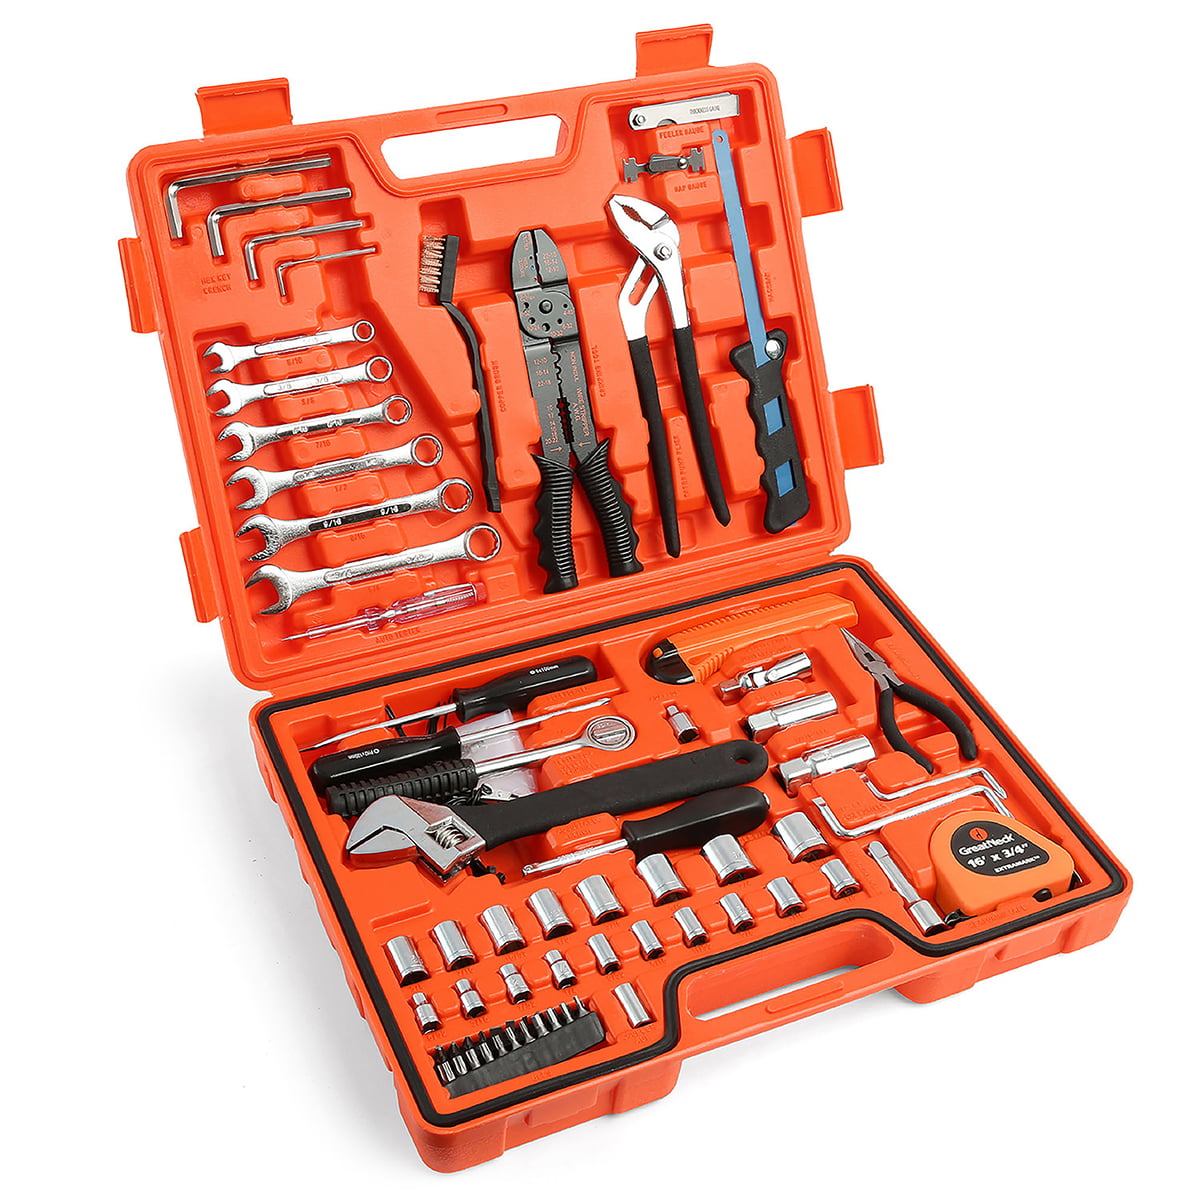 GreatNeck 125 Piece Marine Tool Kit for Boats, Waterproof Case,  Chrome-Plated Tools